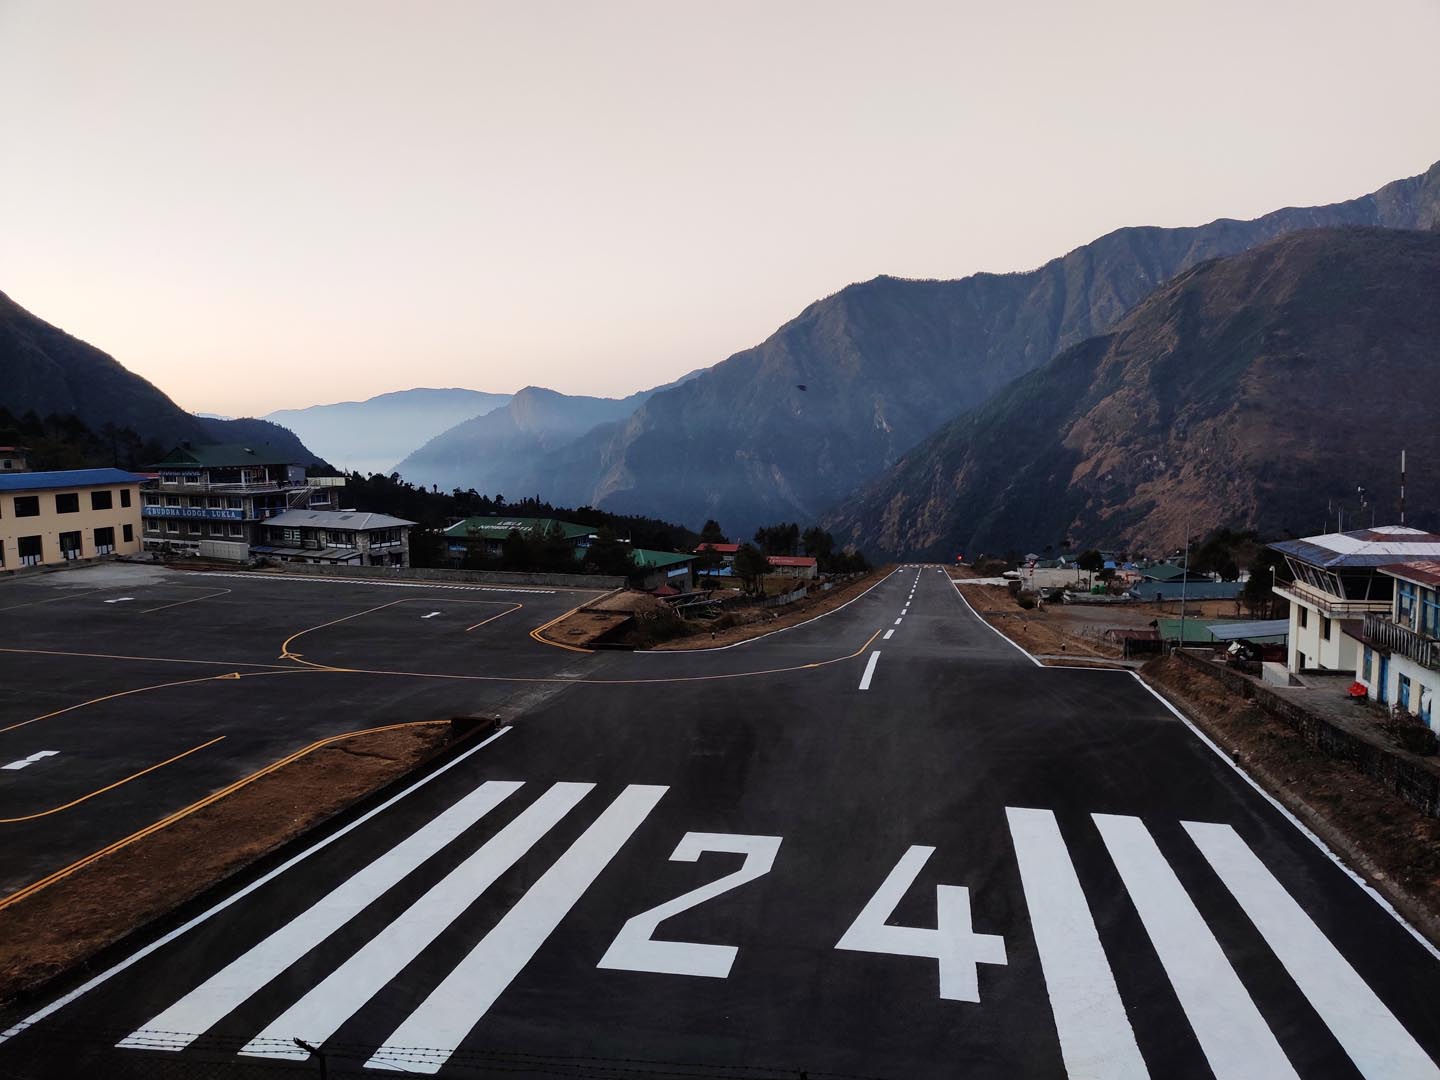 Tenzing Hillary Airport, commonly called Lukla Airport